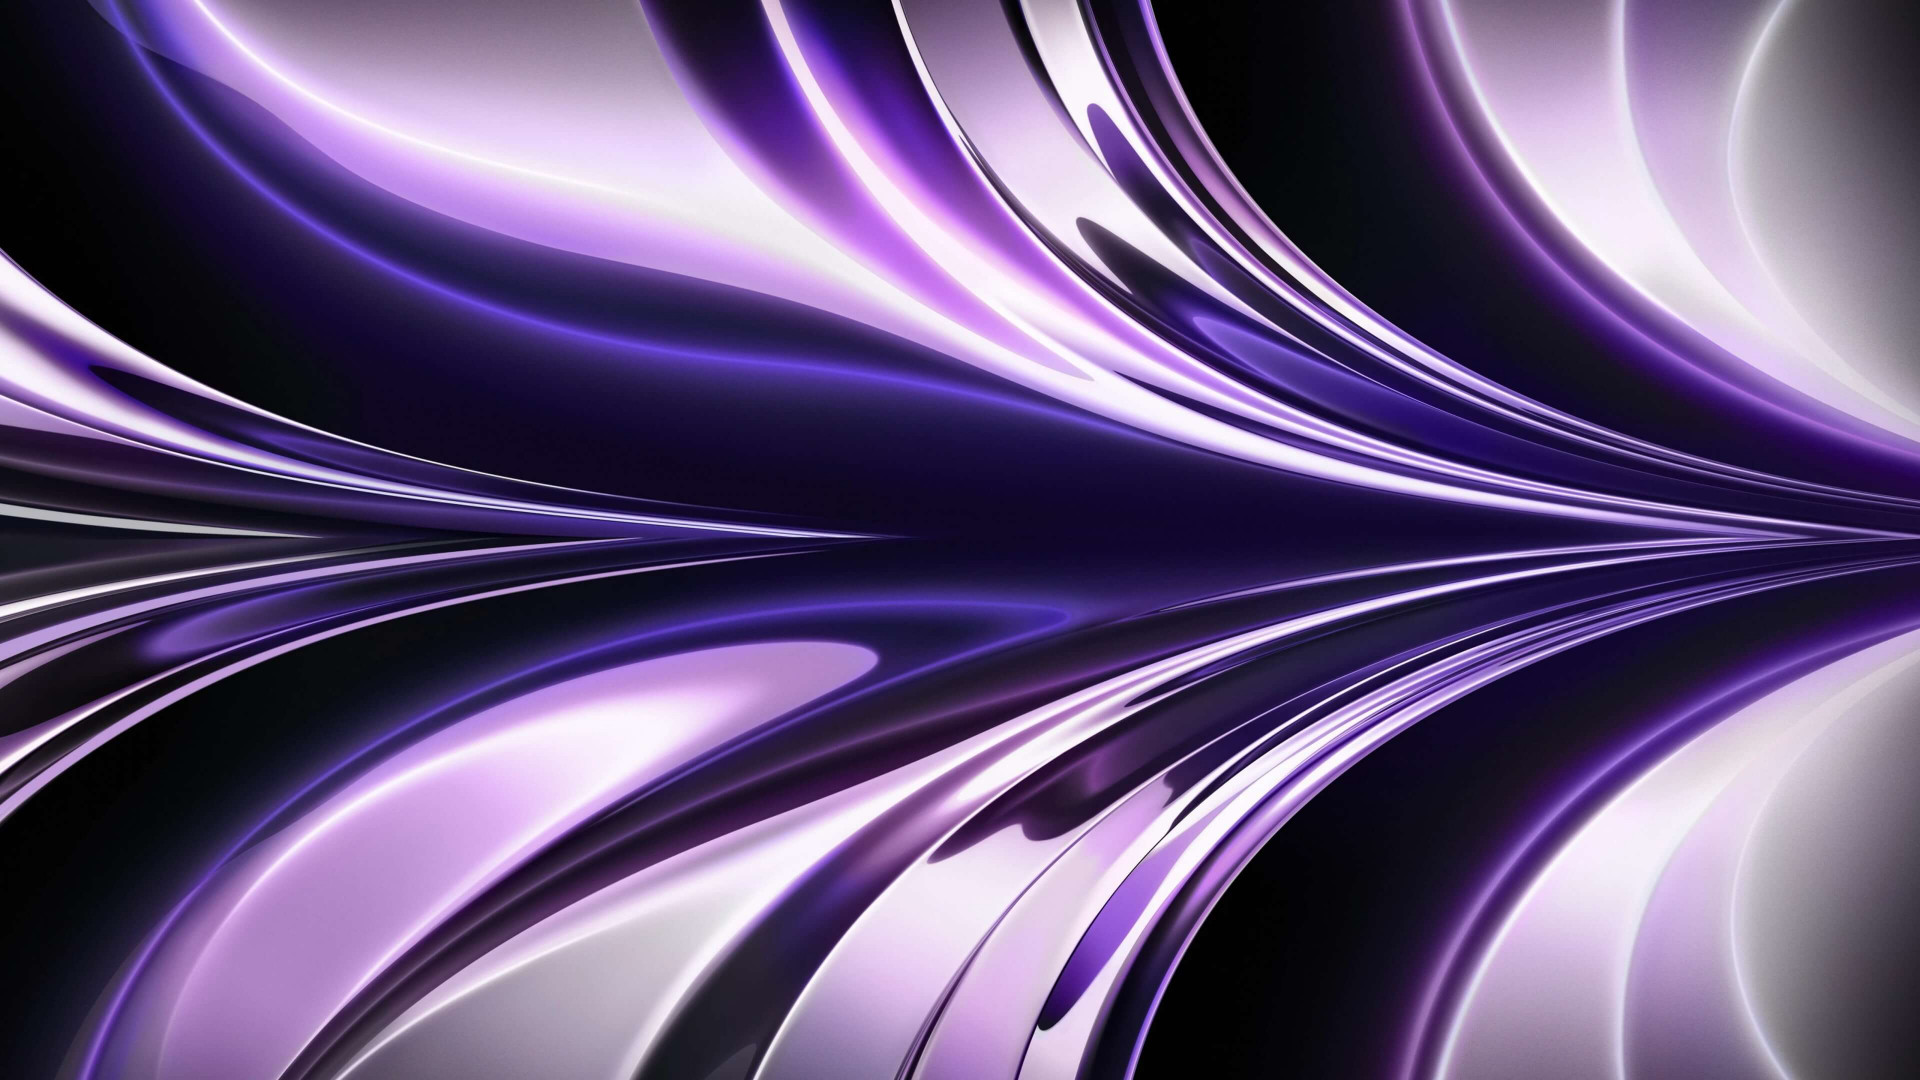 iOS 16 abstract purple style wallpaper 1920x1080